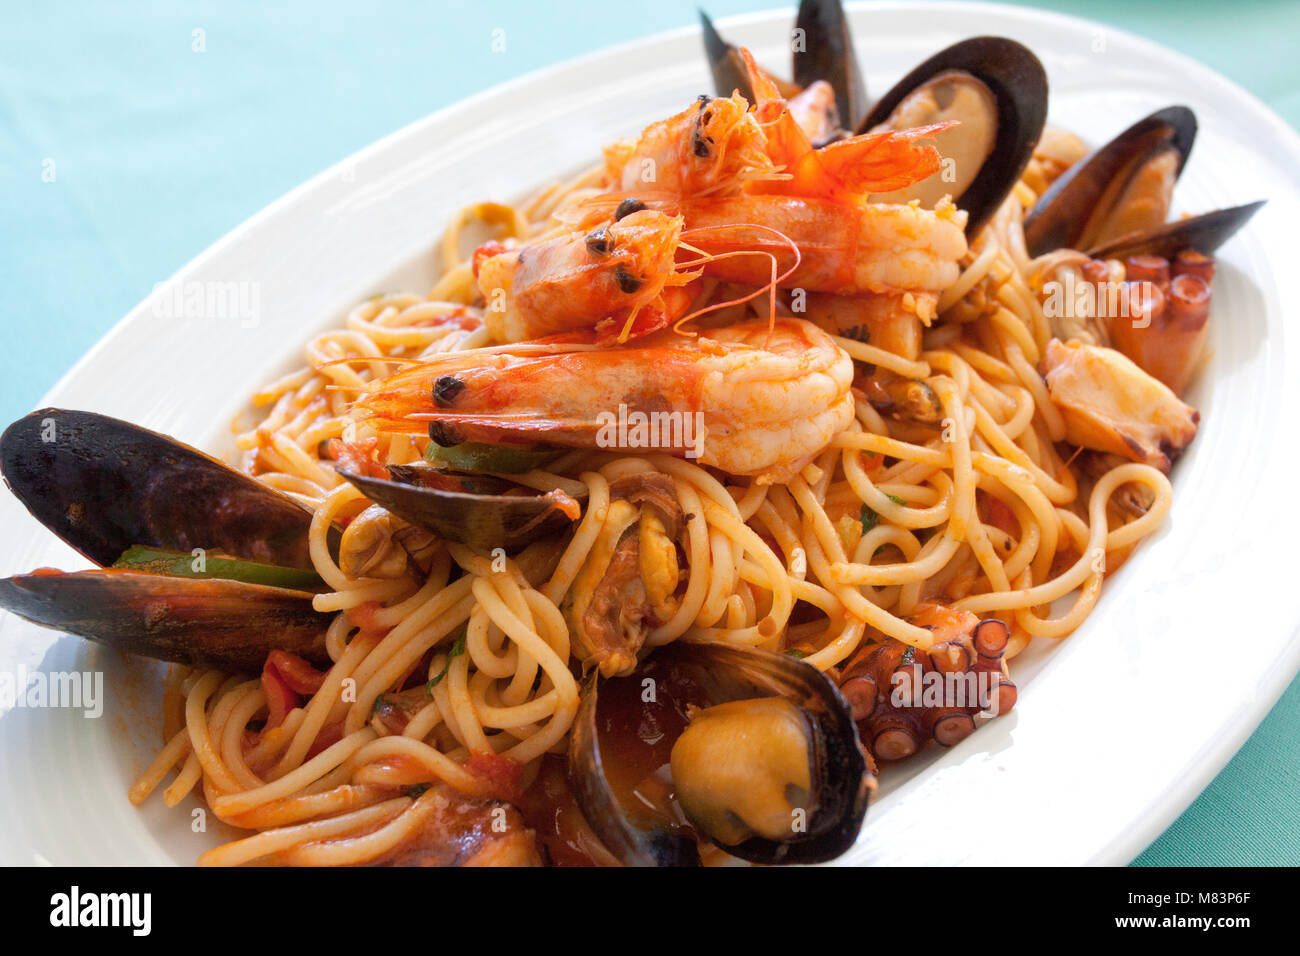 Spagetty Seafood Meal Stock Photo